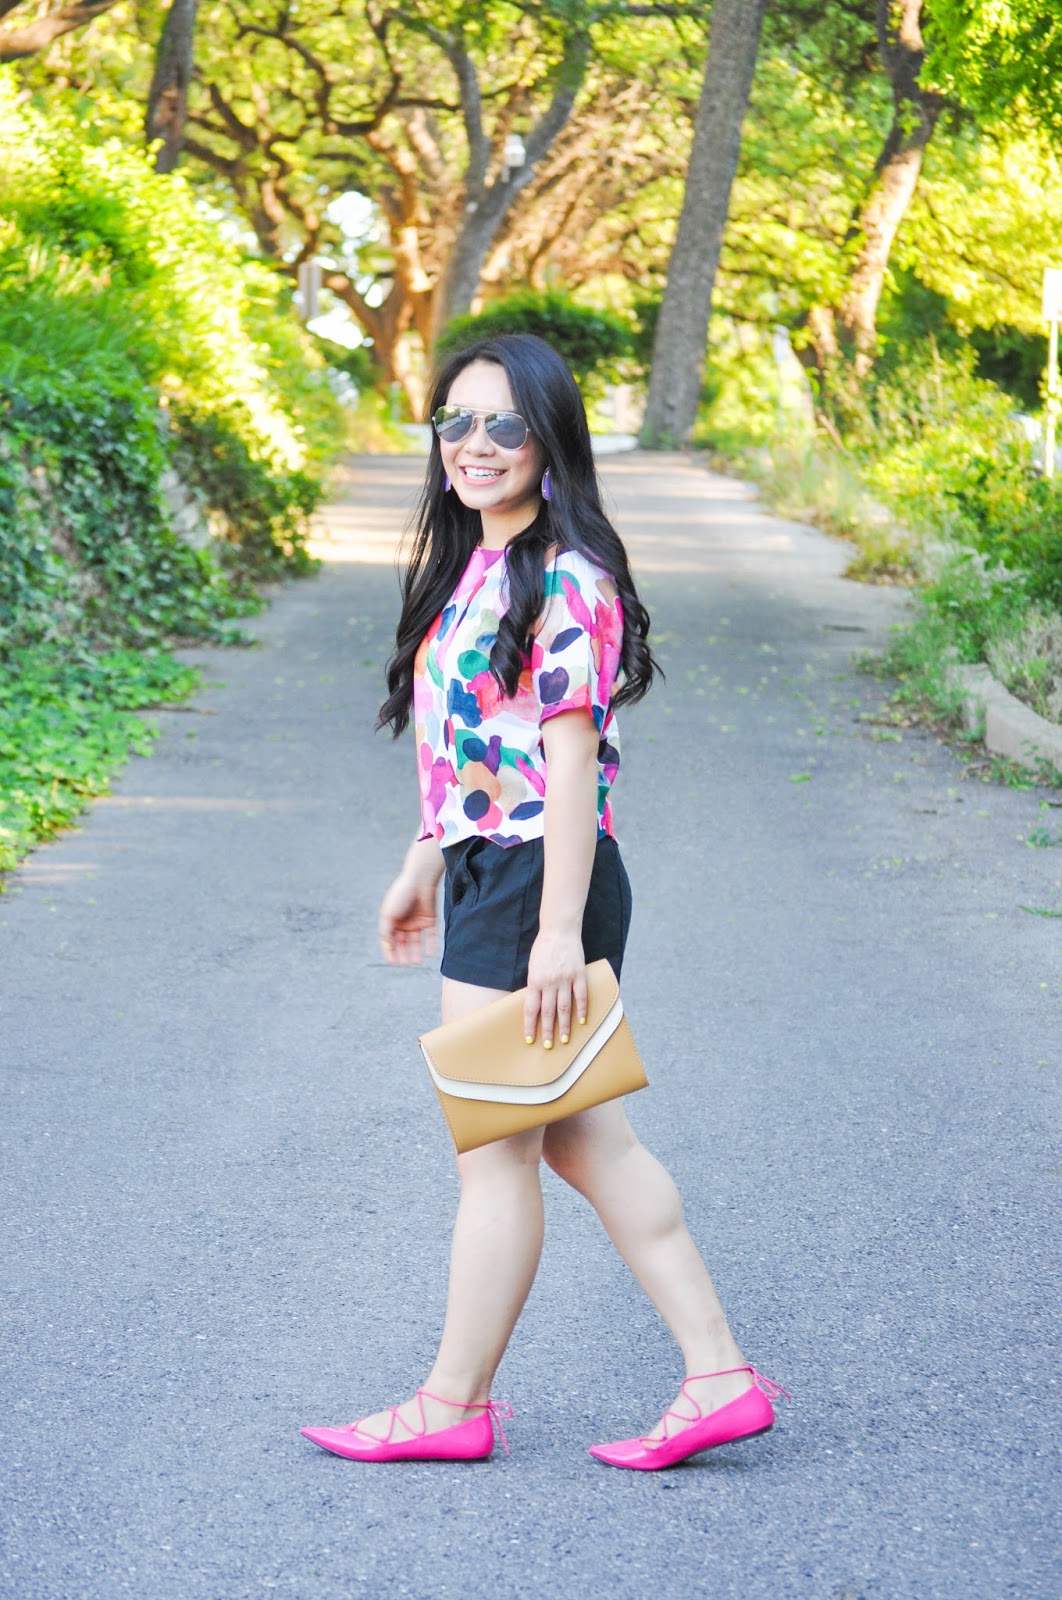 3 Reasons to Wear a Colorful Printed Top | www.thebellainsider.com